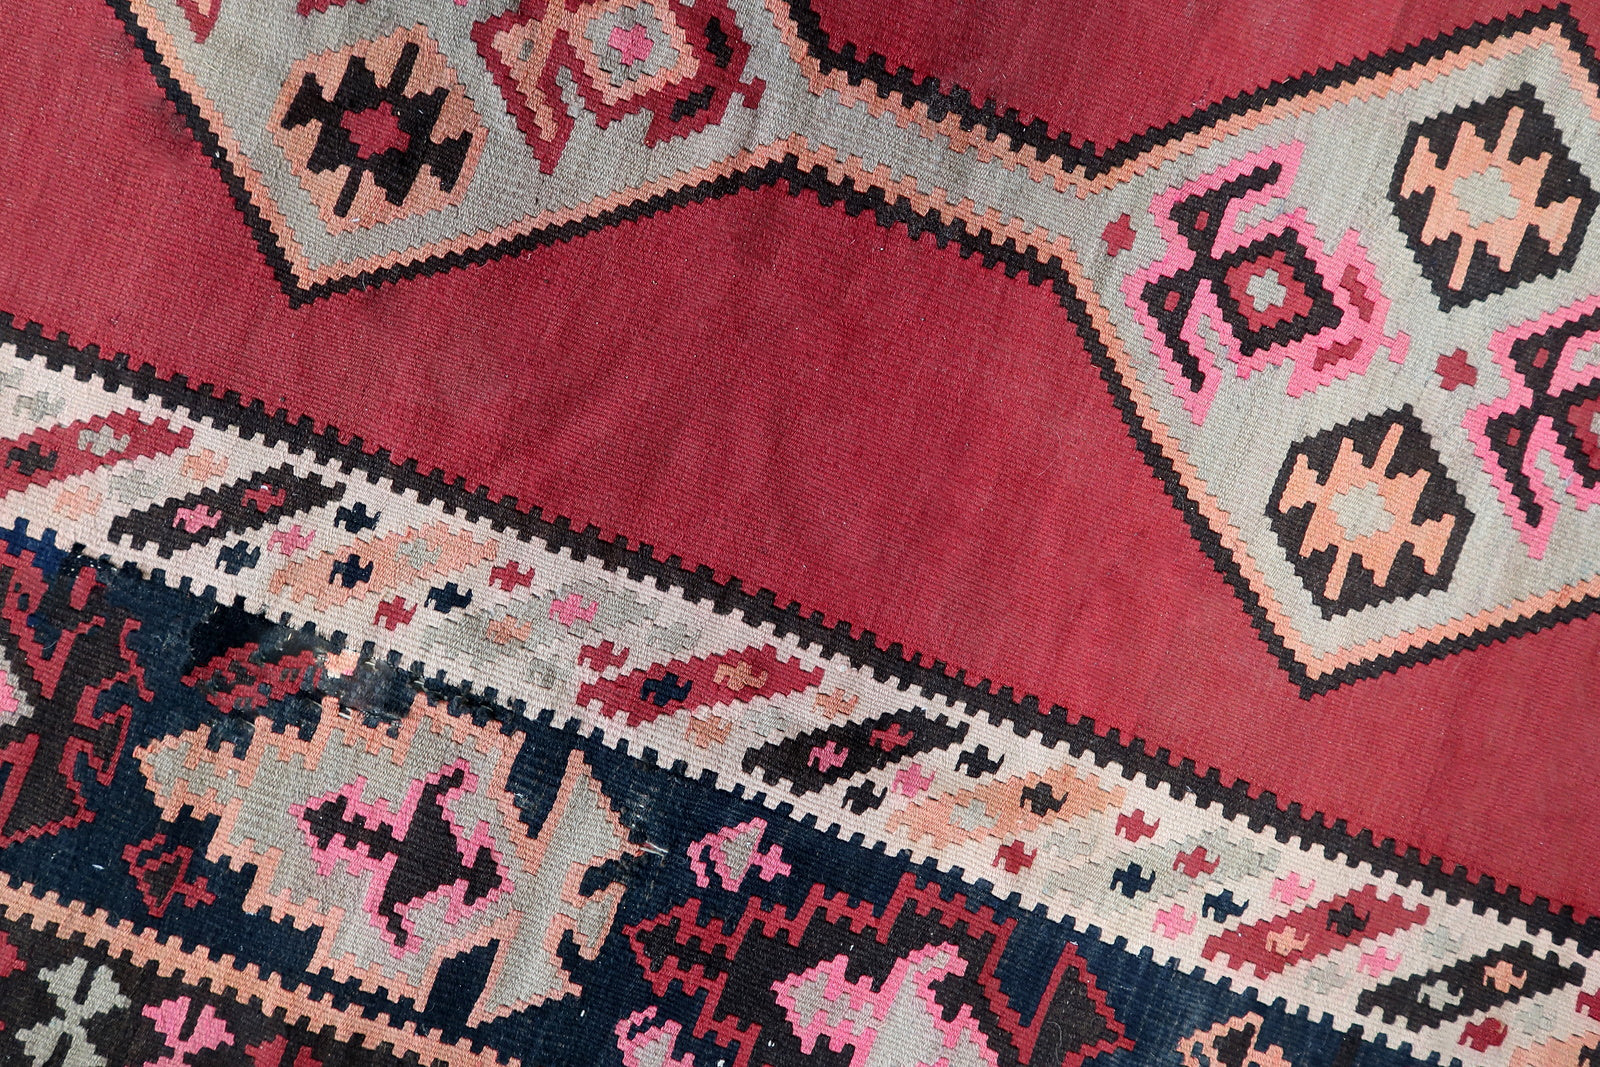 5.2' x 12.1' Afghan Wool Kilim from the 1960s